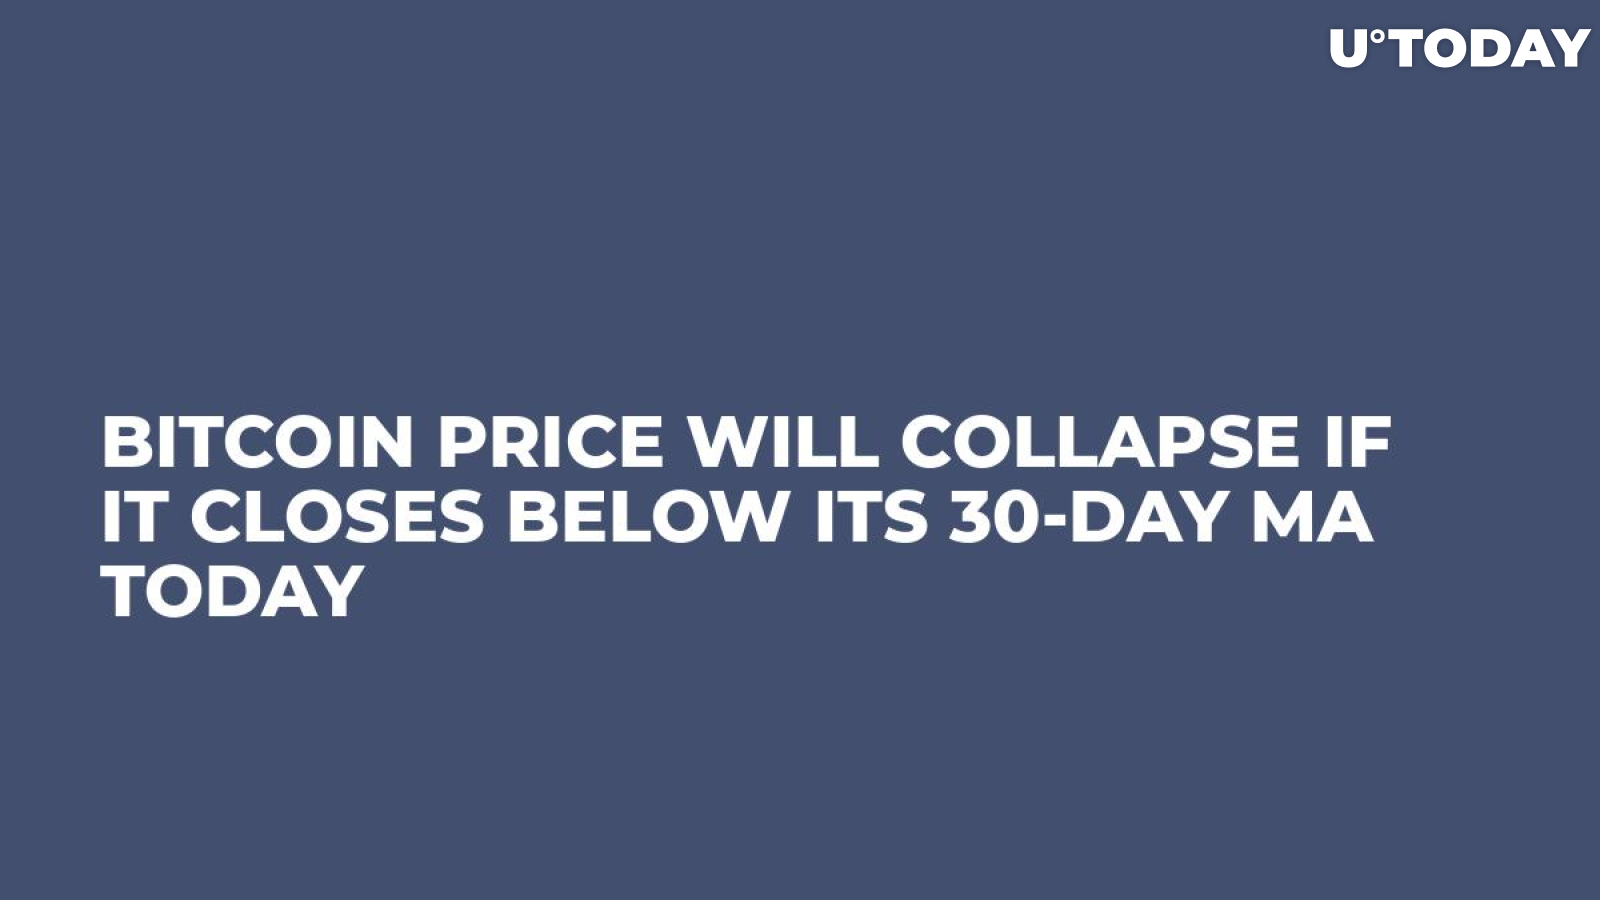 Bitcoin Price Will Collapse If It Closes Below Its 30-Day MA Today